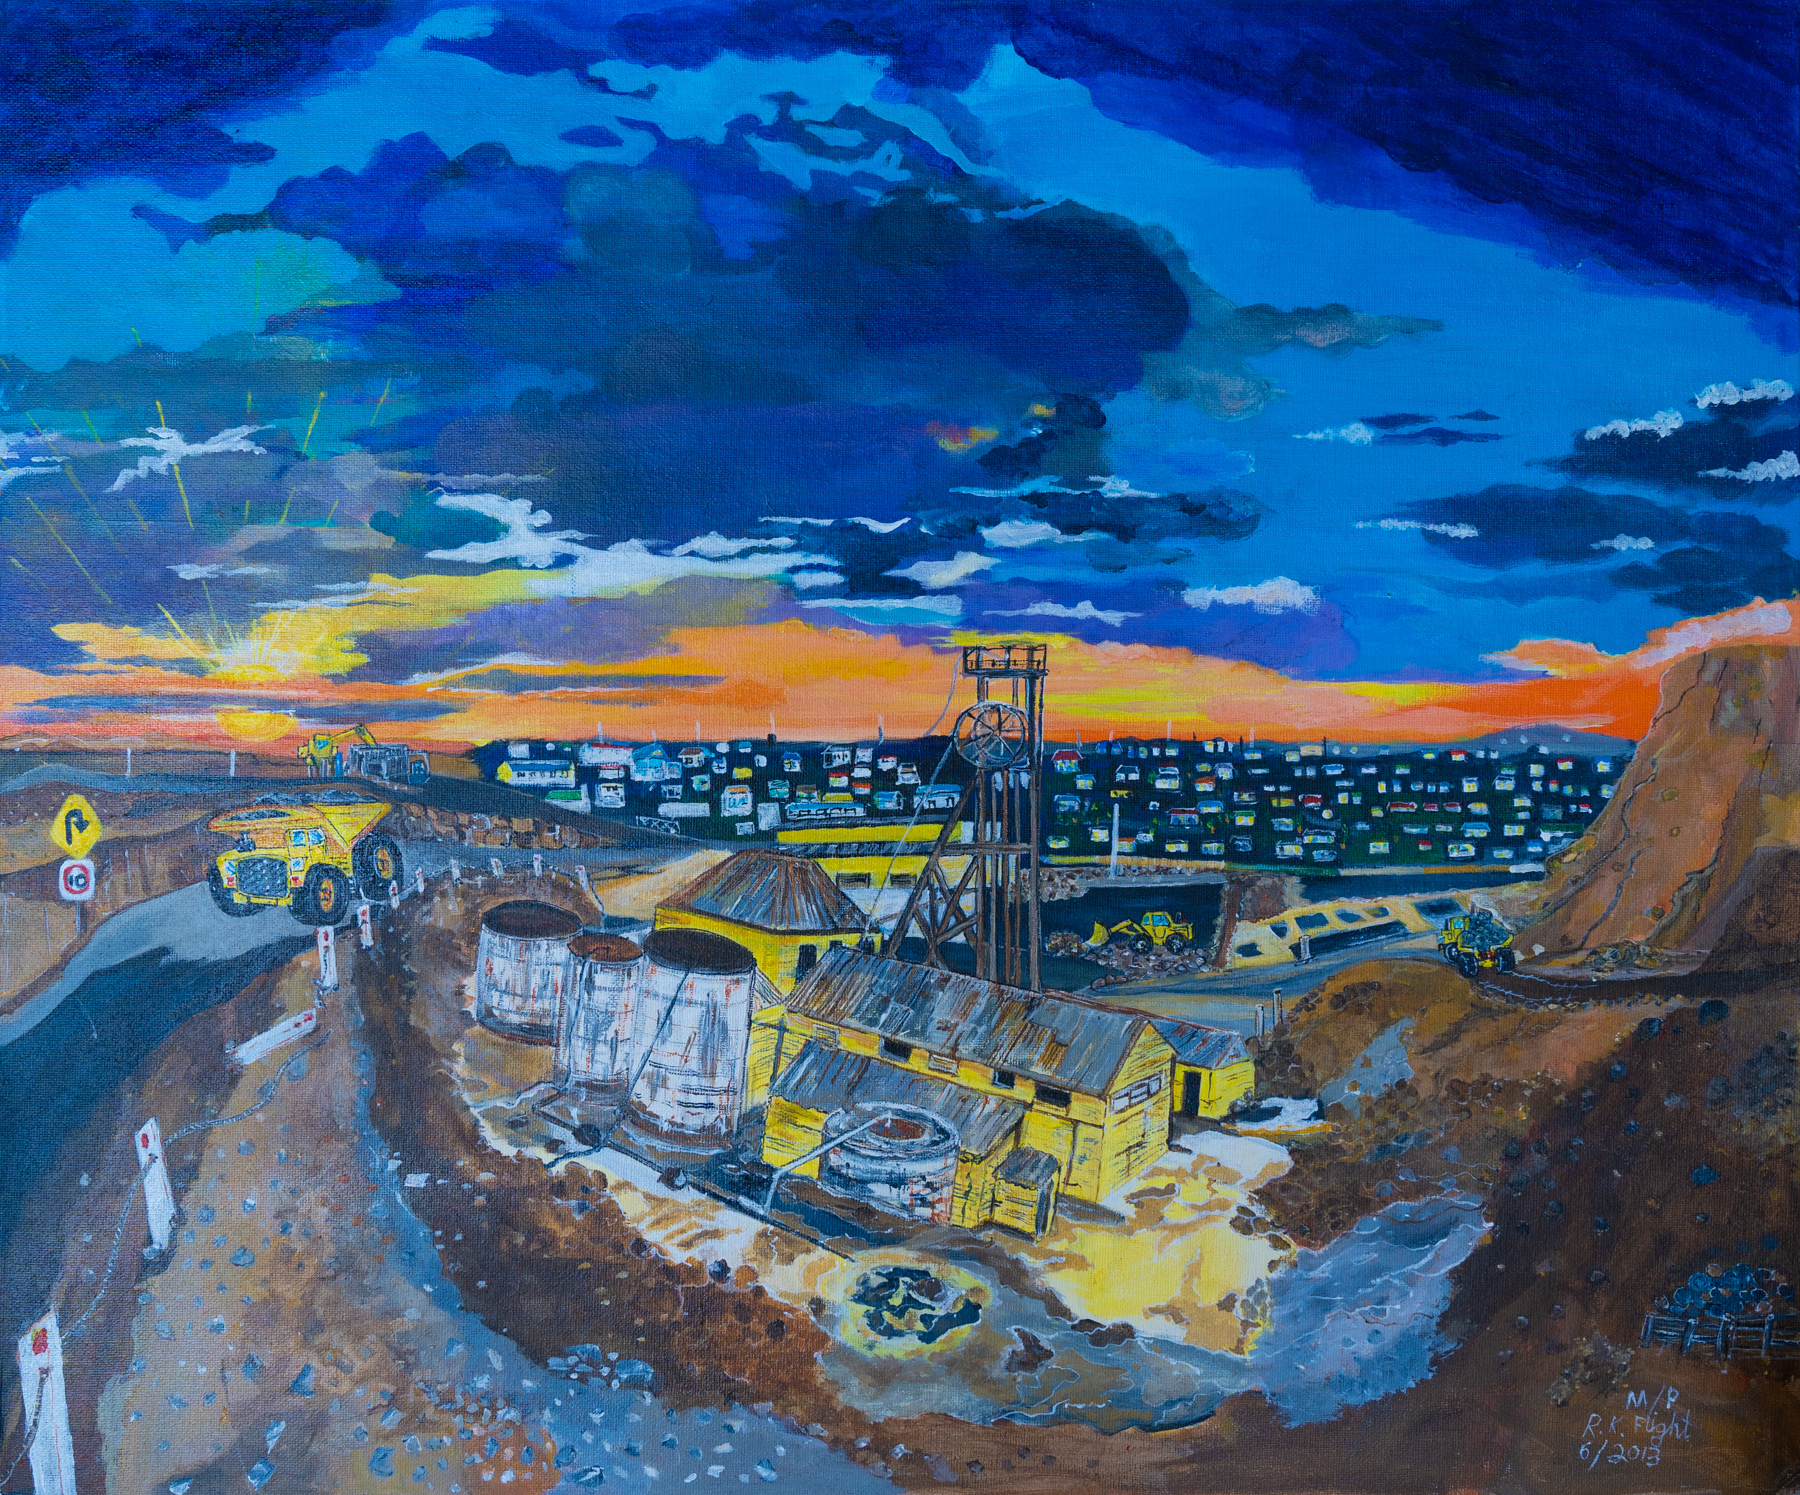 Painting showing the mine at Broken Hill under a dark blue sky